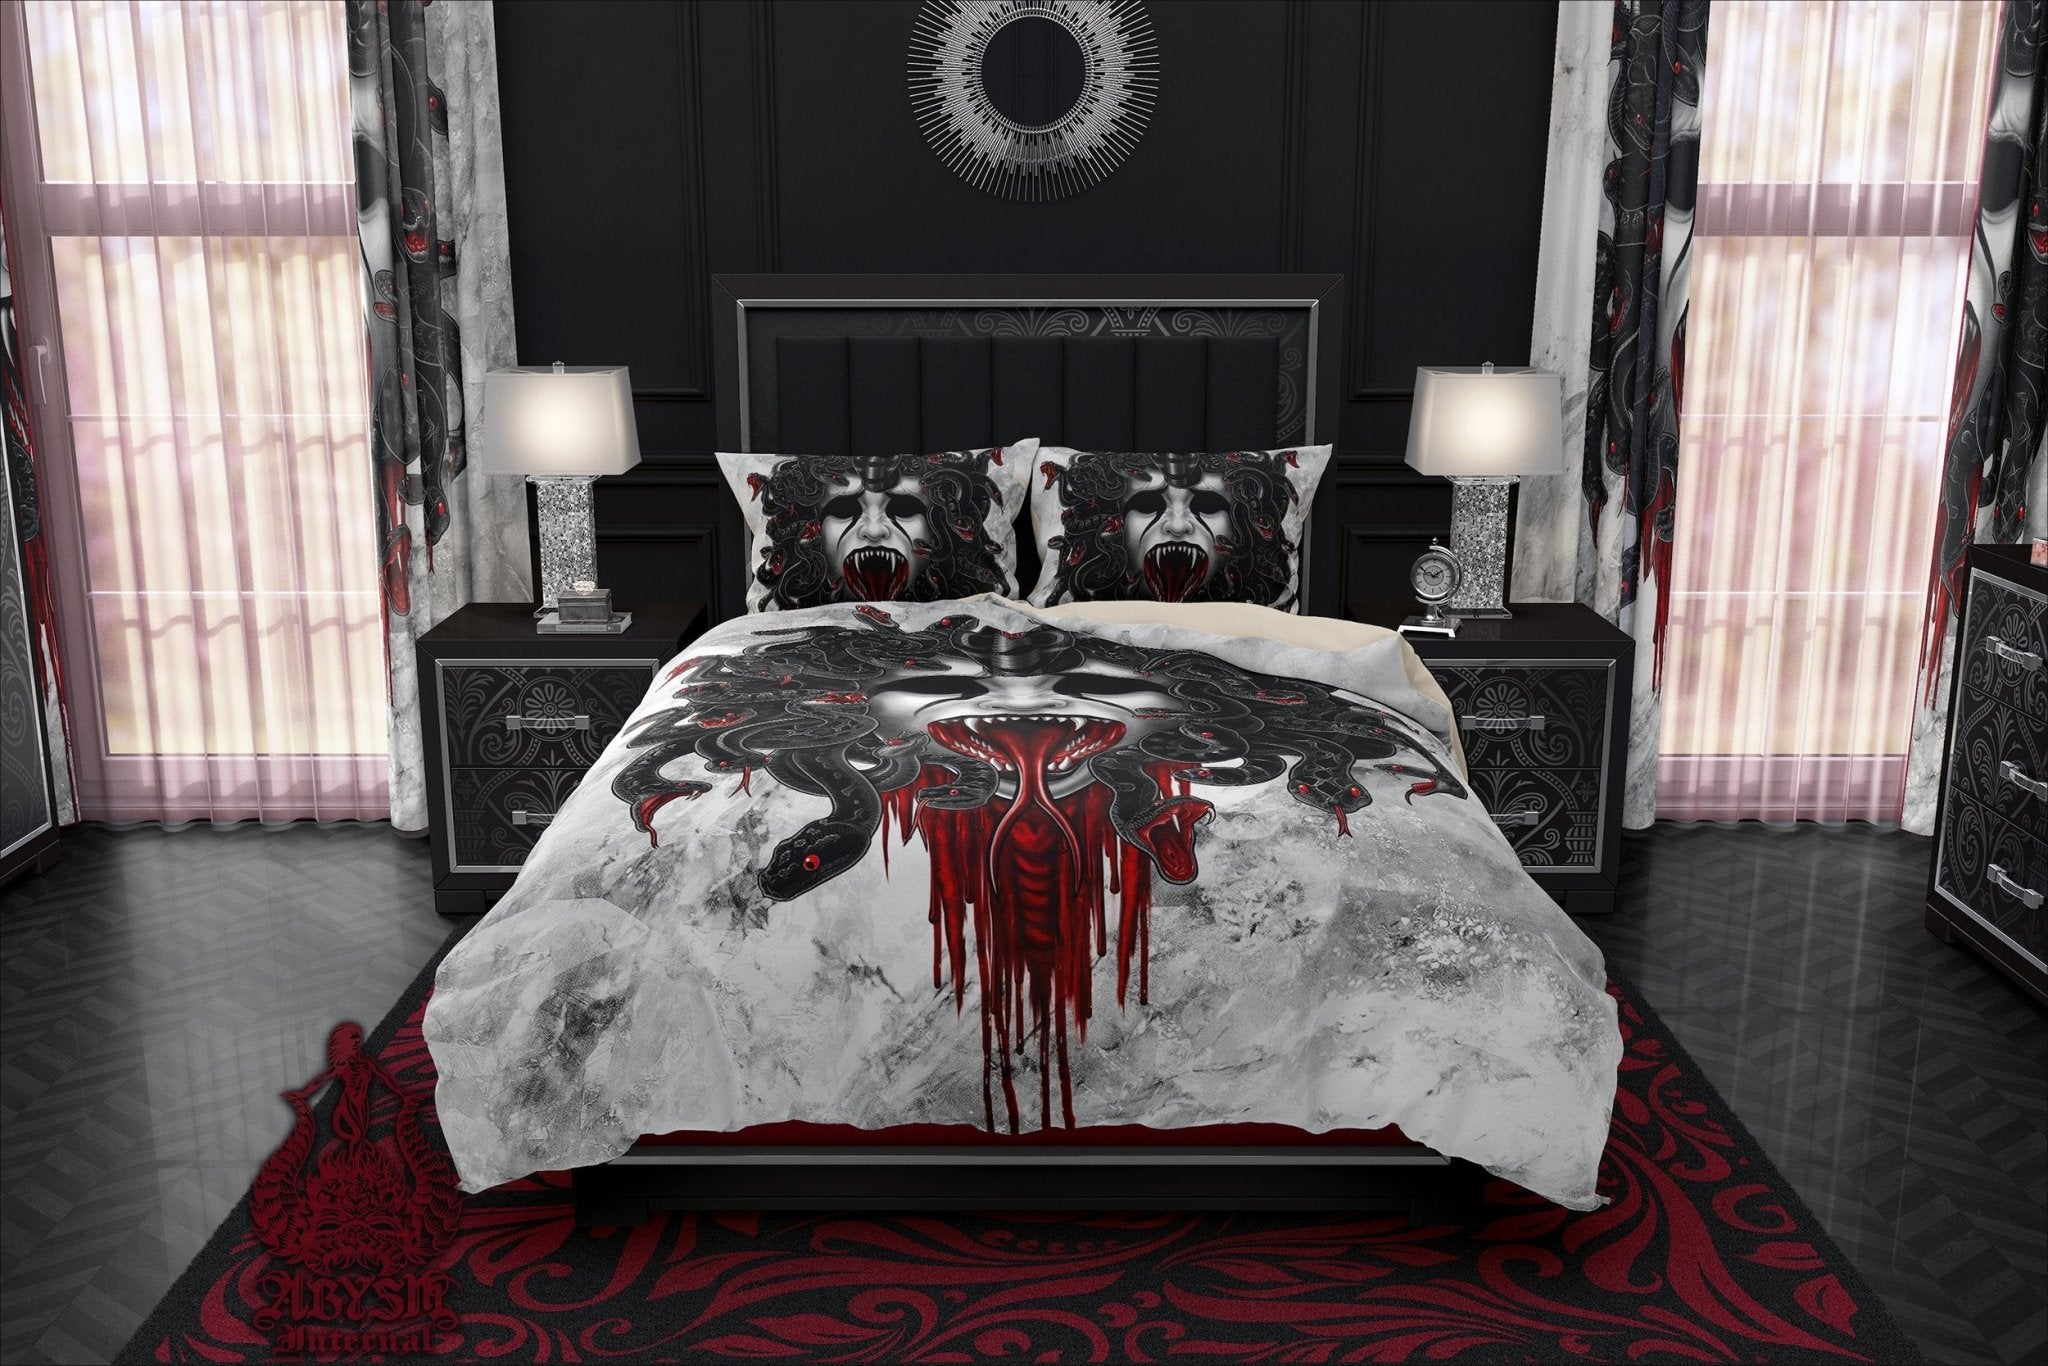 White Goth Bedding Set, Comforter and Duvet, Vampire Medusa, Gothic Bed Cover and Bedroom Decor, King, Queen and Twin Size - 3 Colors - Abysm Internal